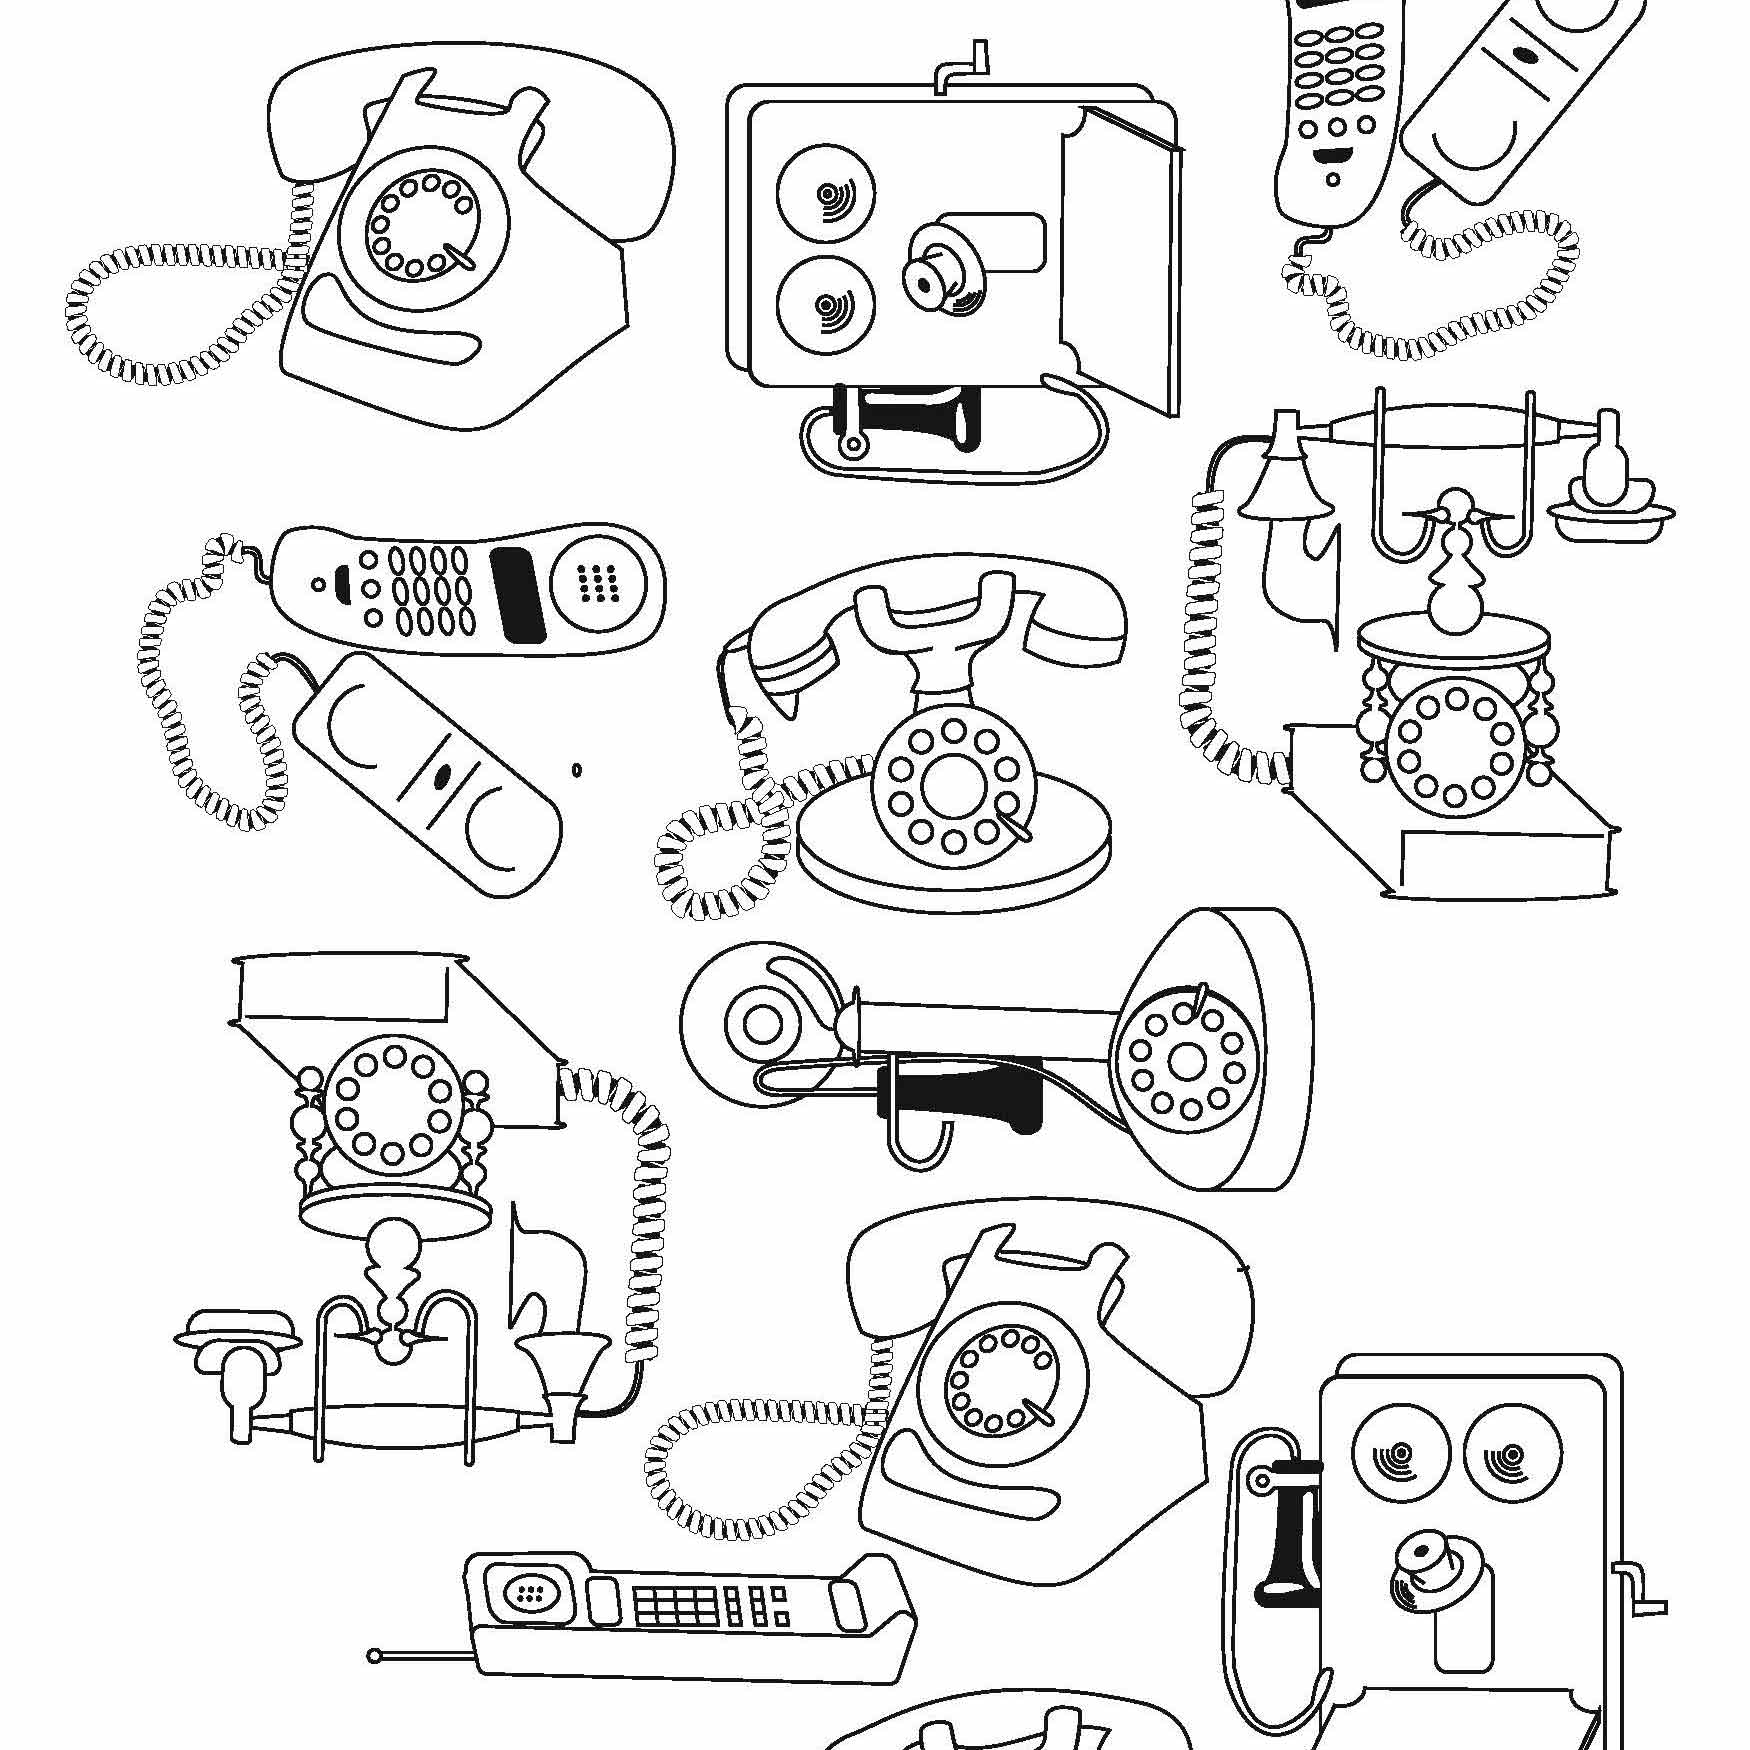 Here's an idea for an ipone case; illustrations of all the phones that come before.